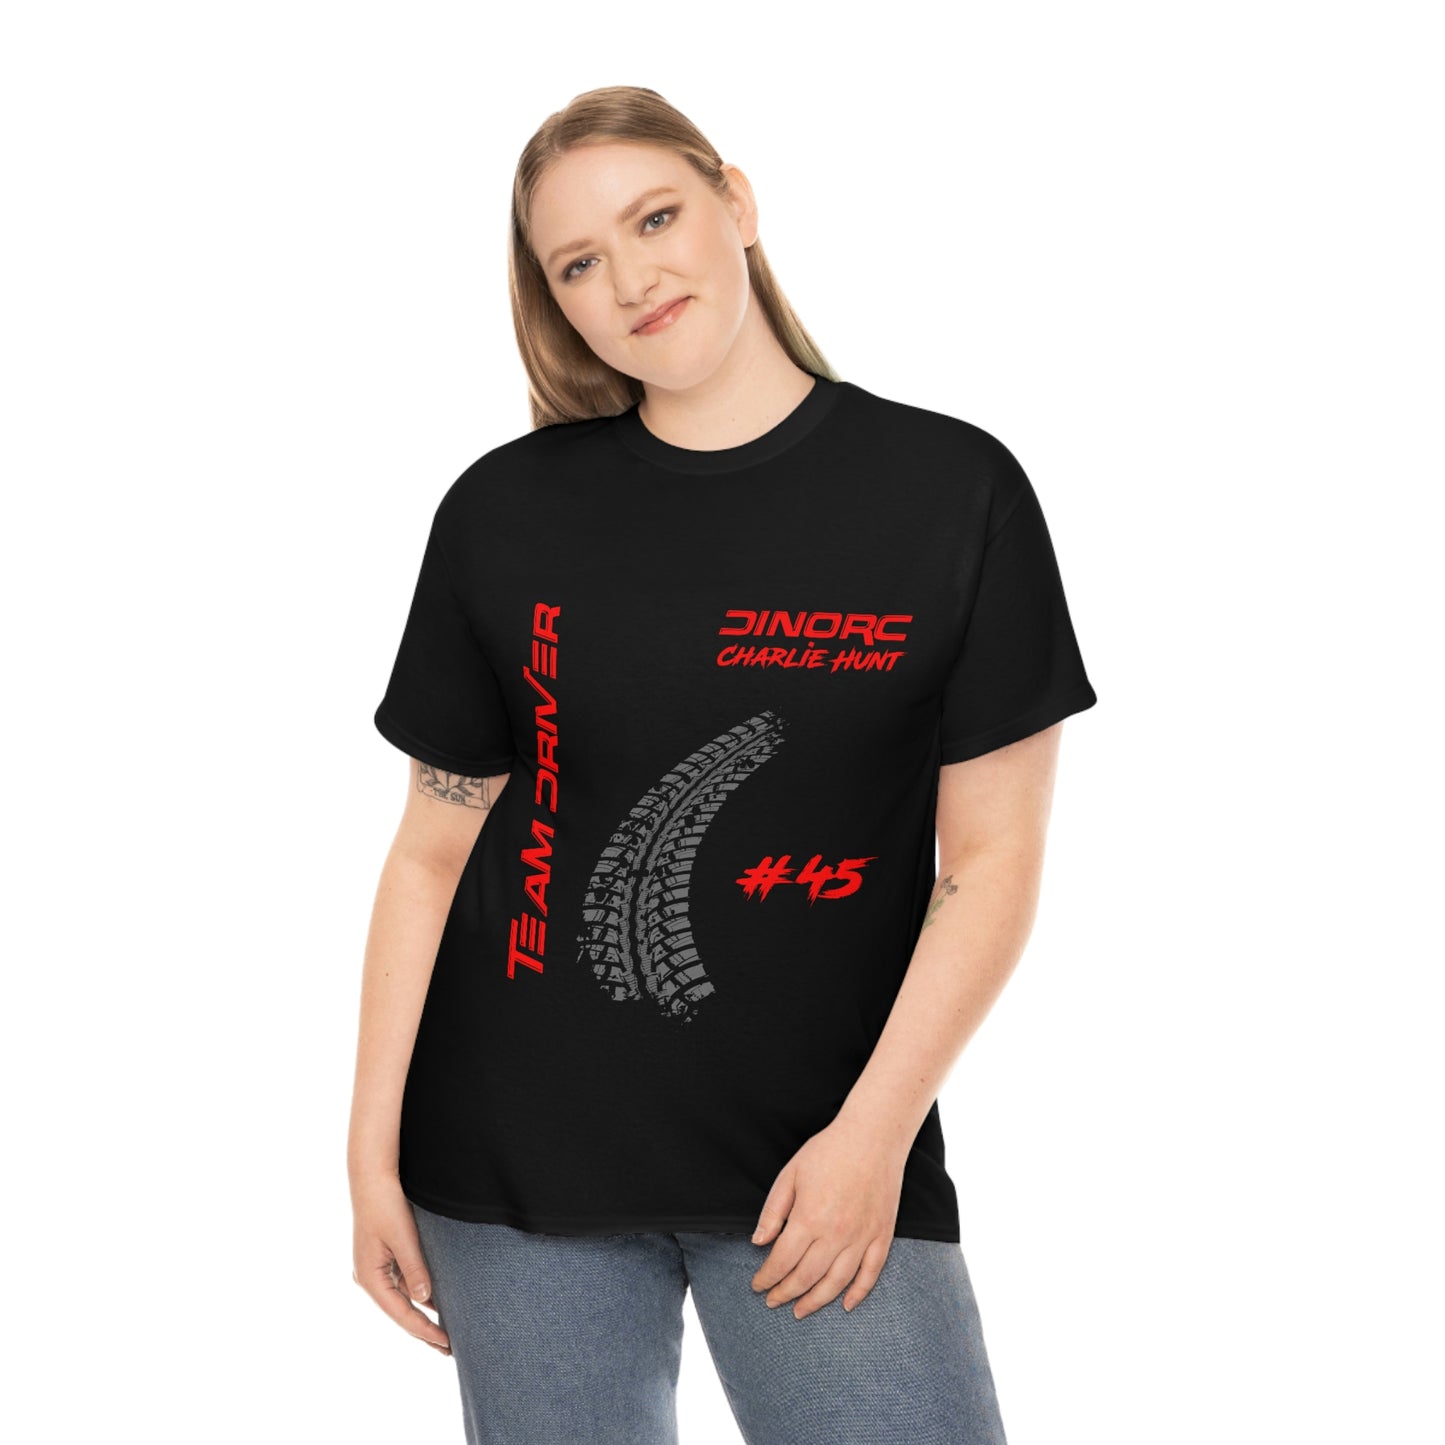 Team Driver Charlie Hunt Front and Back DinoRc Logo T-Shirt S-5x 5 colors